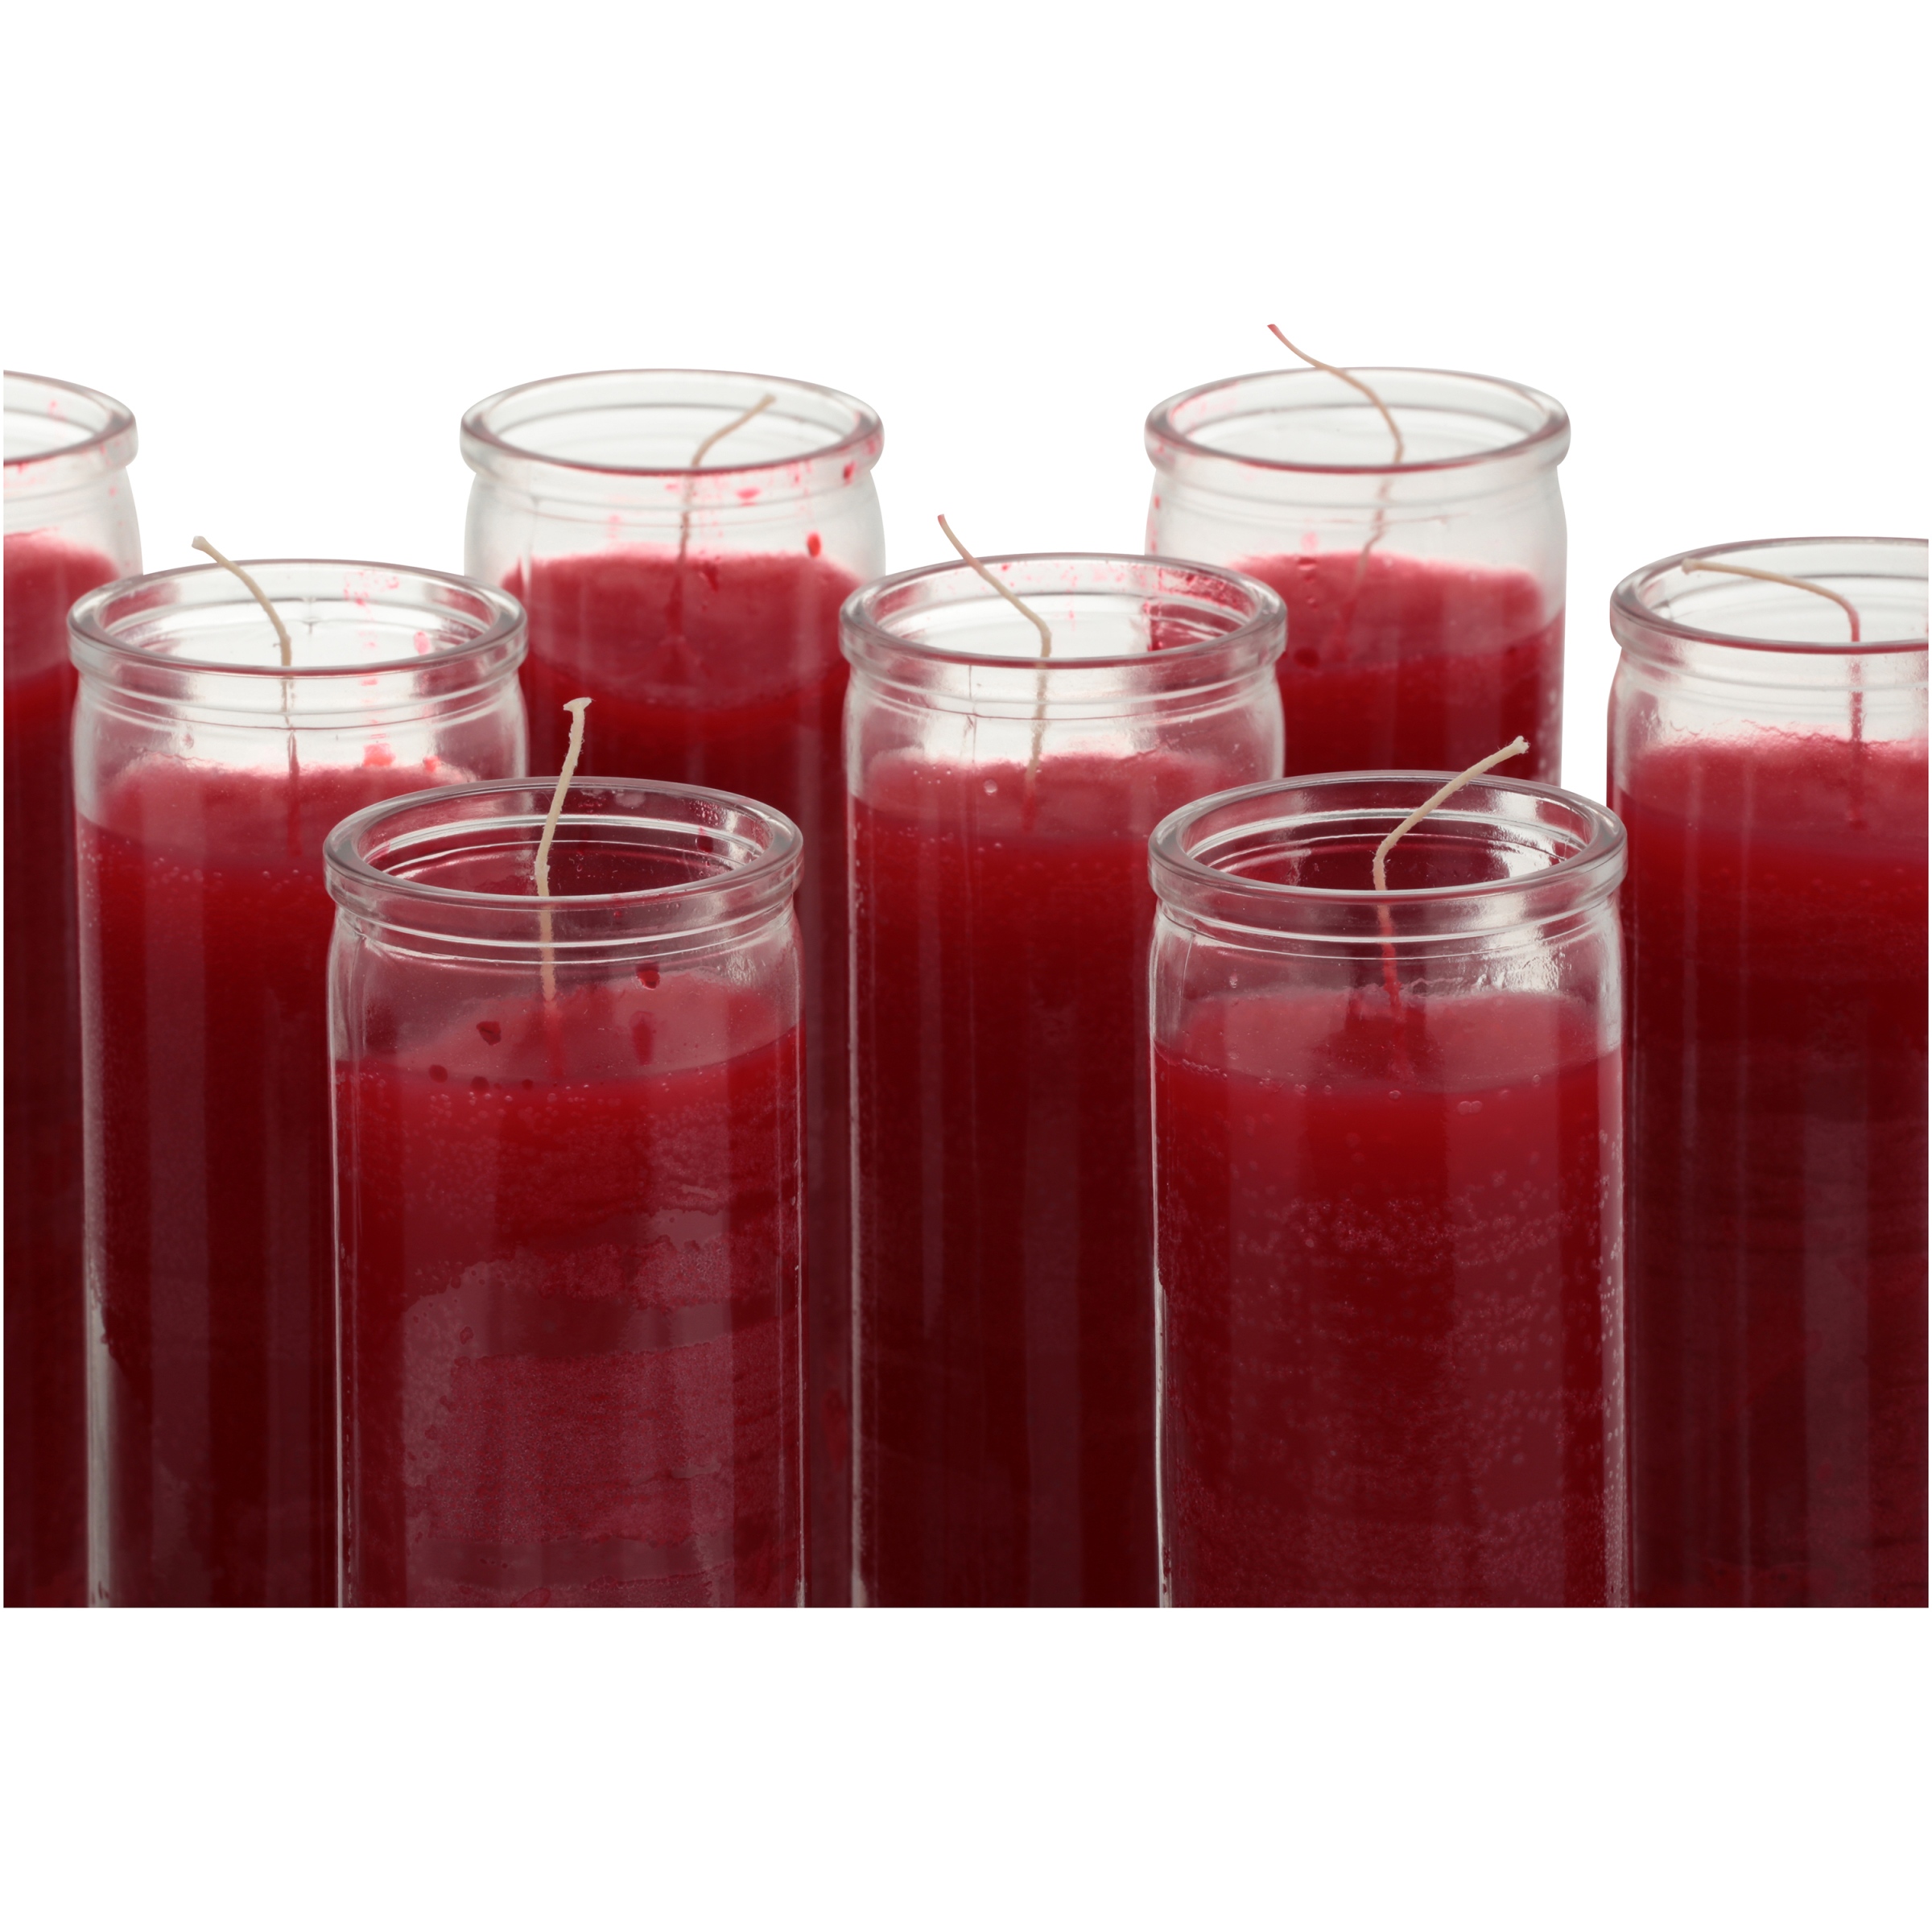 Sanctuary Solid Color Church Candles, 12 pack - image 2 of 9